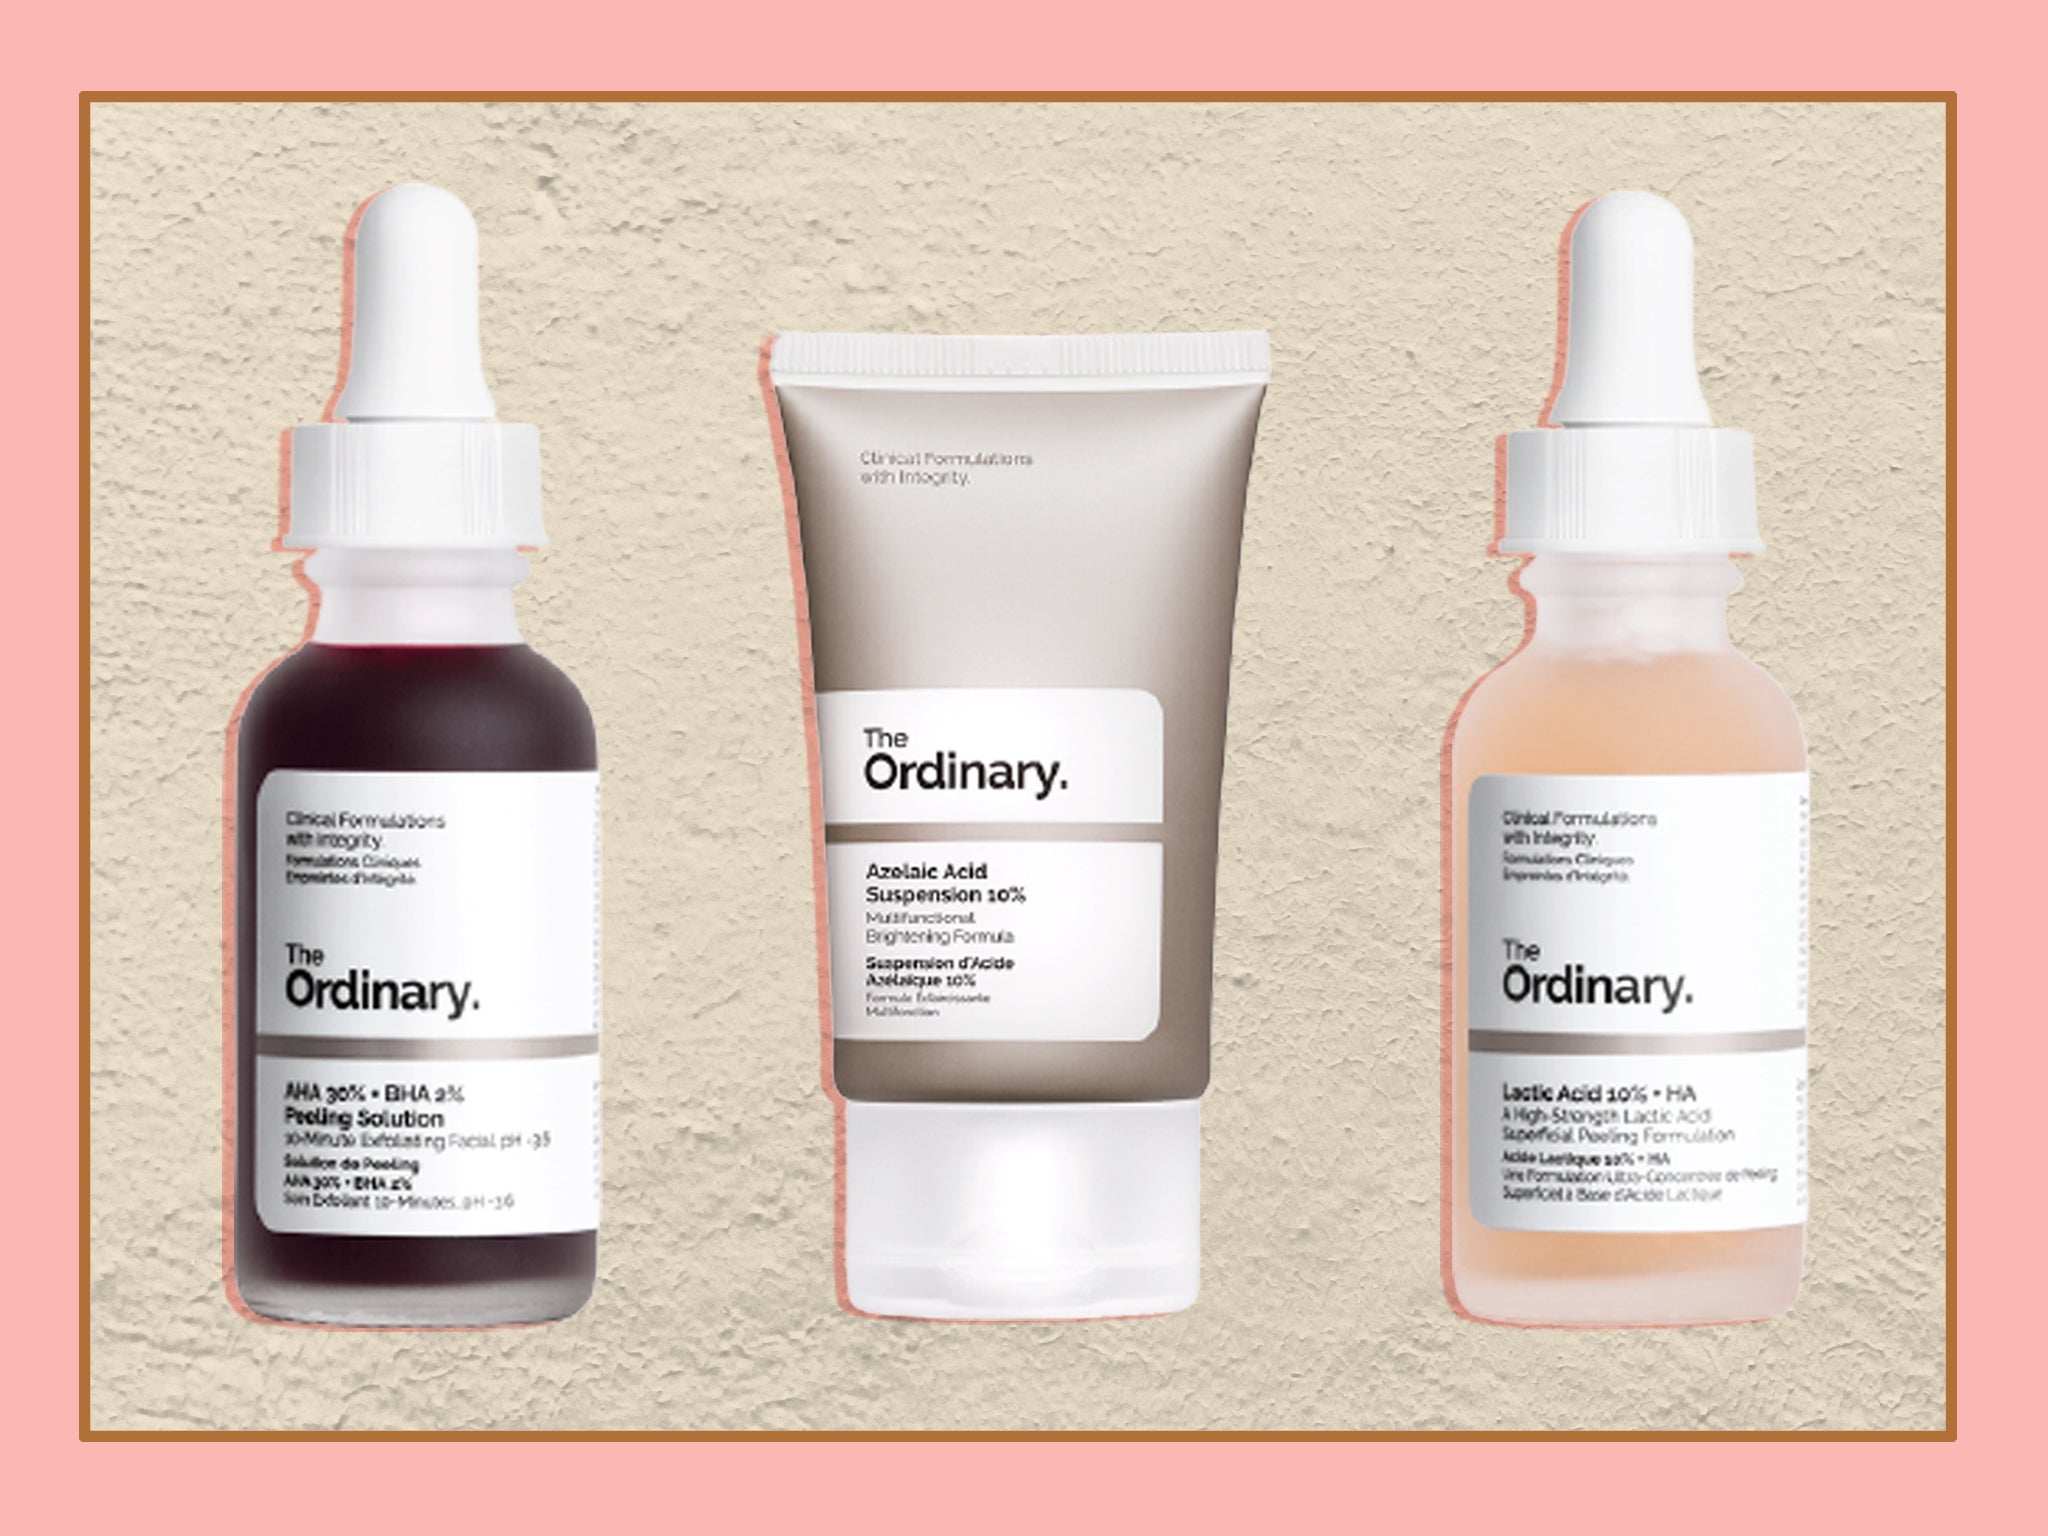 Best The Ordinary products for acne-prone skin | The